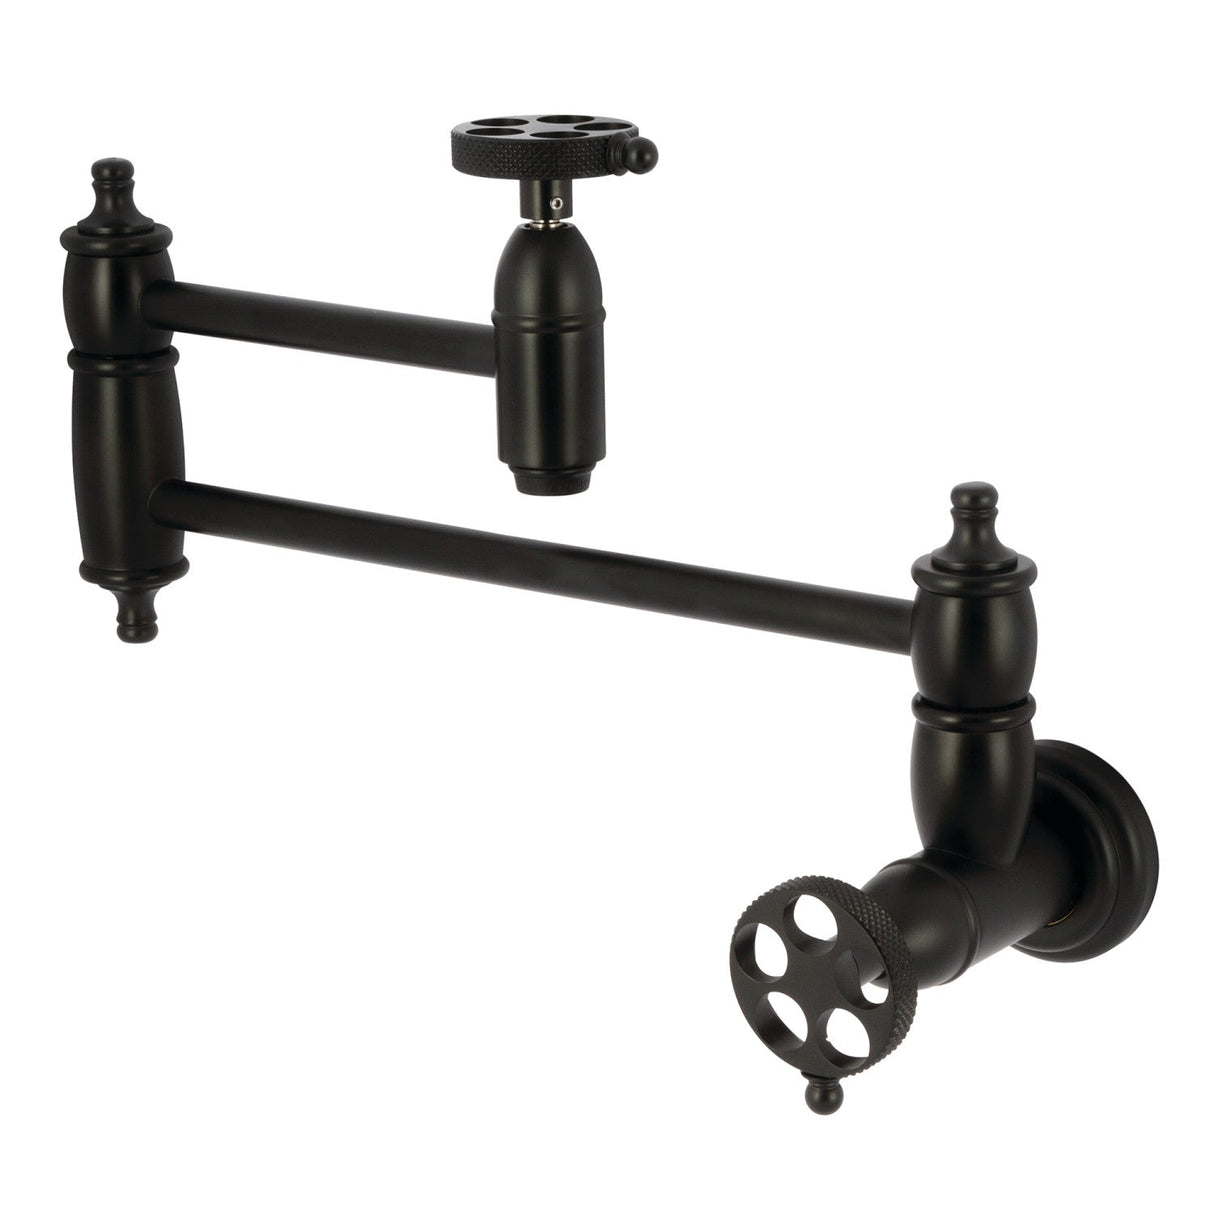 Webb KS3100RKX Two-Handle 1-Hole Wall Mount Pot Filler with Knurled Handle, Matte Black